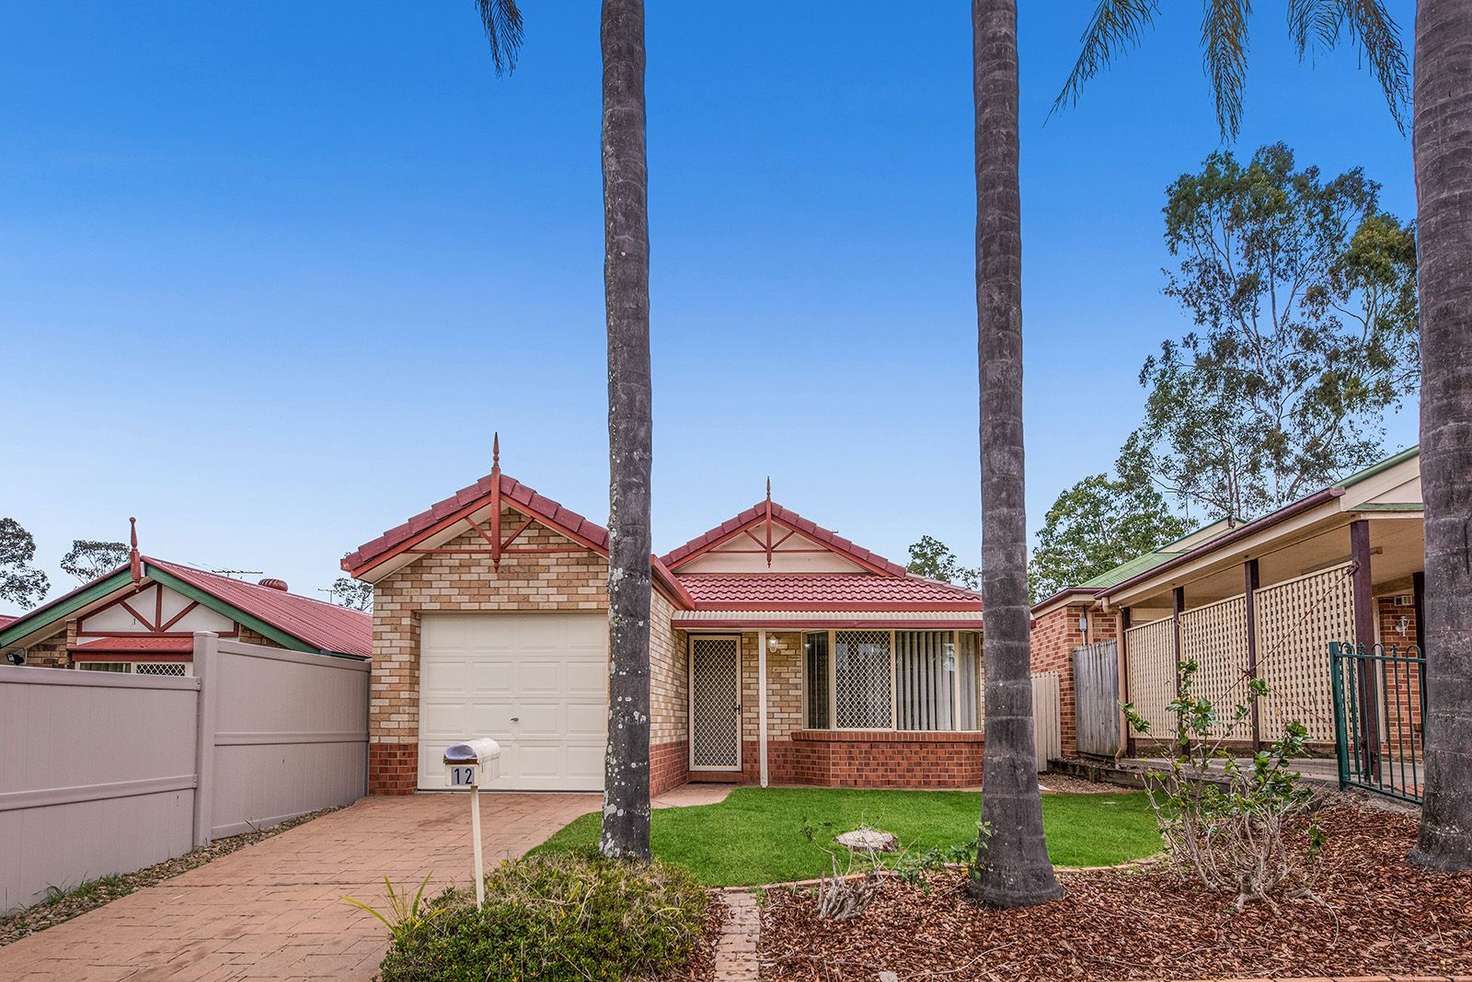 Main view of Homely house listing, 12 Murray Pl, Forest Lake QLD 4078